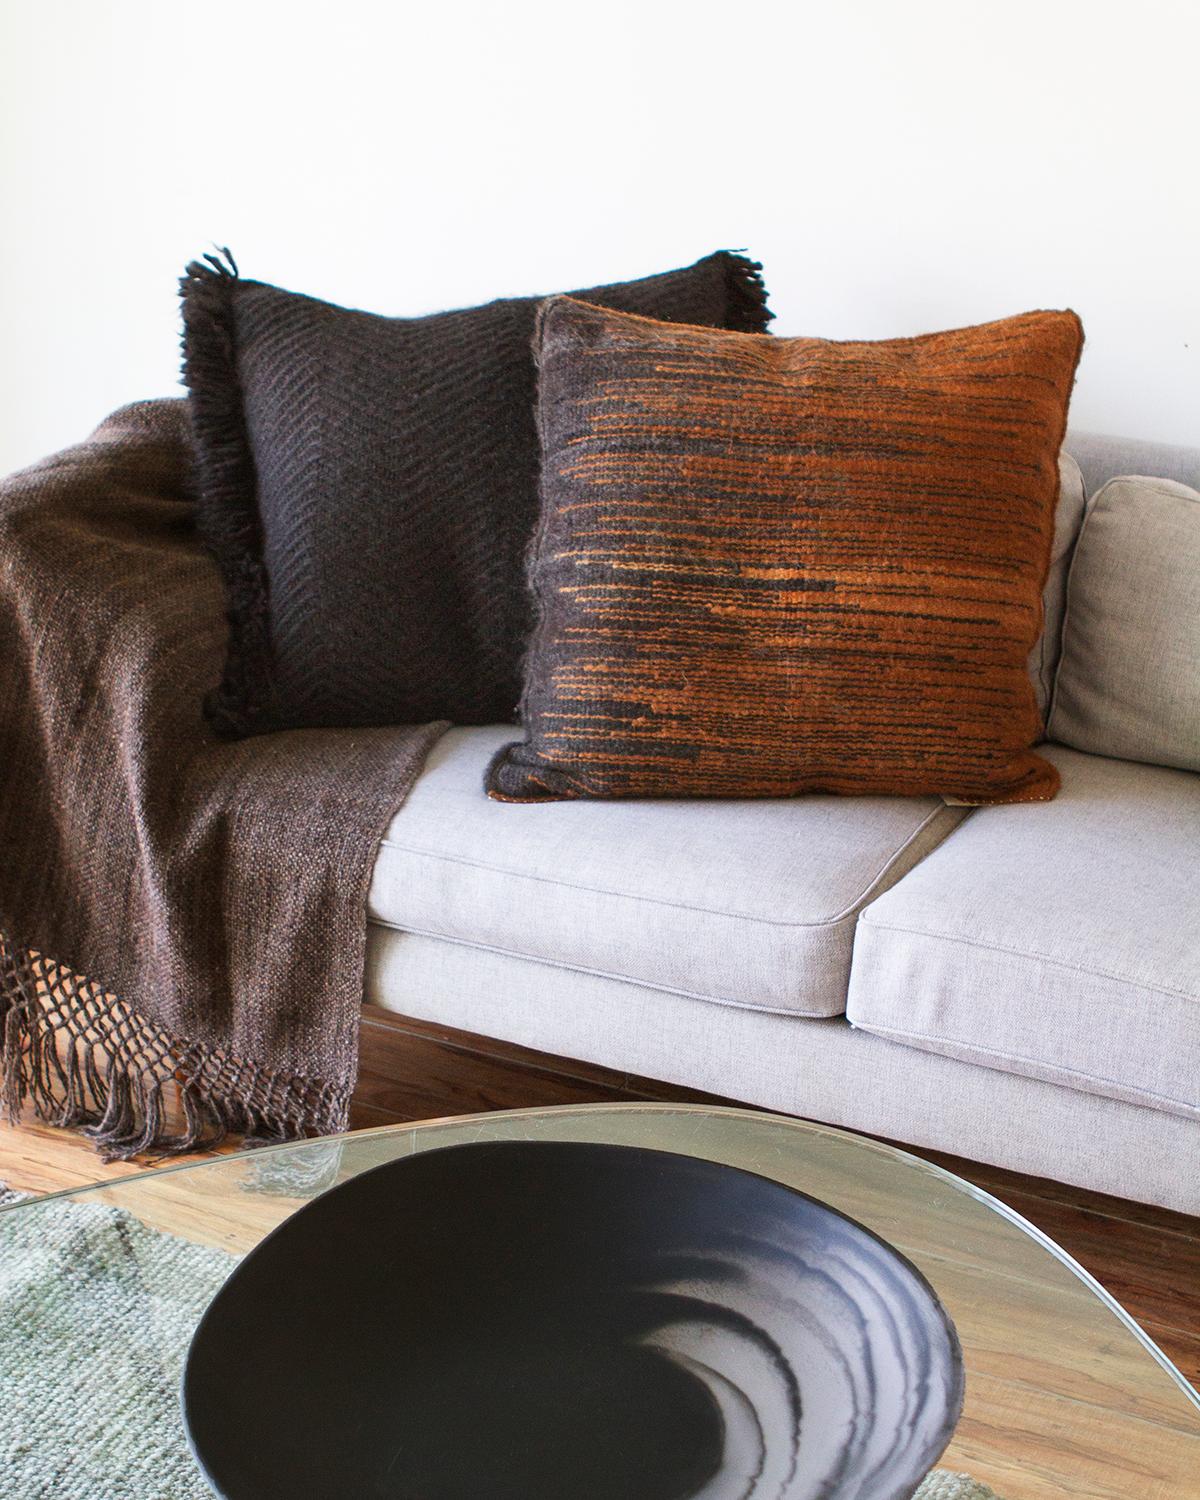 A warm cushion for your living room
This artisanal pillow is crafted from luxurious llama wool and features a unique chocolate brown and black geometric-striped design. Its large size makes it perfect for cozy lounging on a big couch in your living